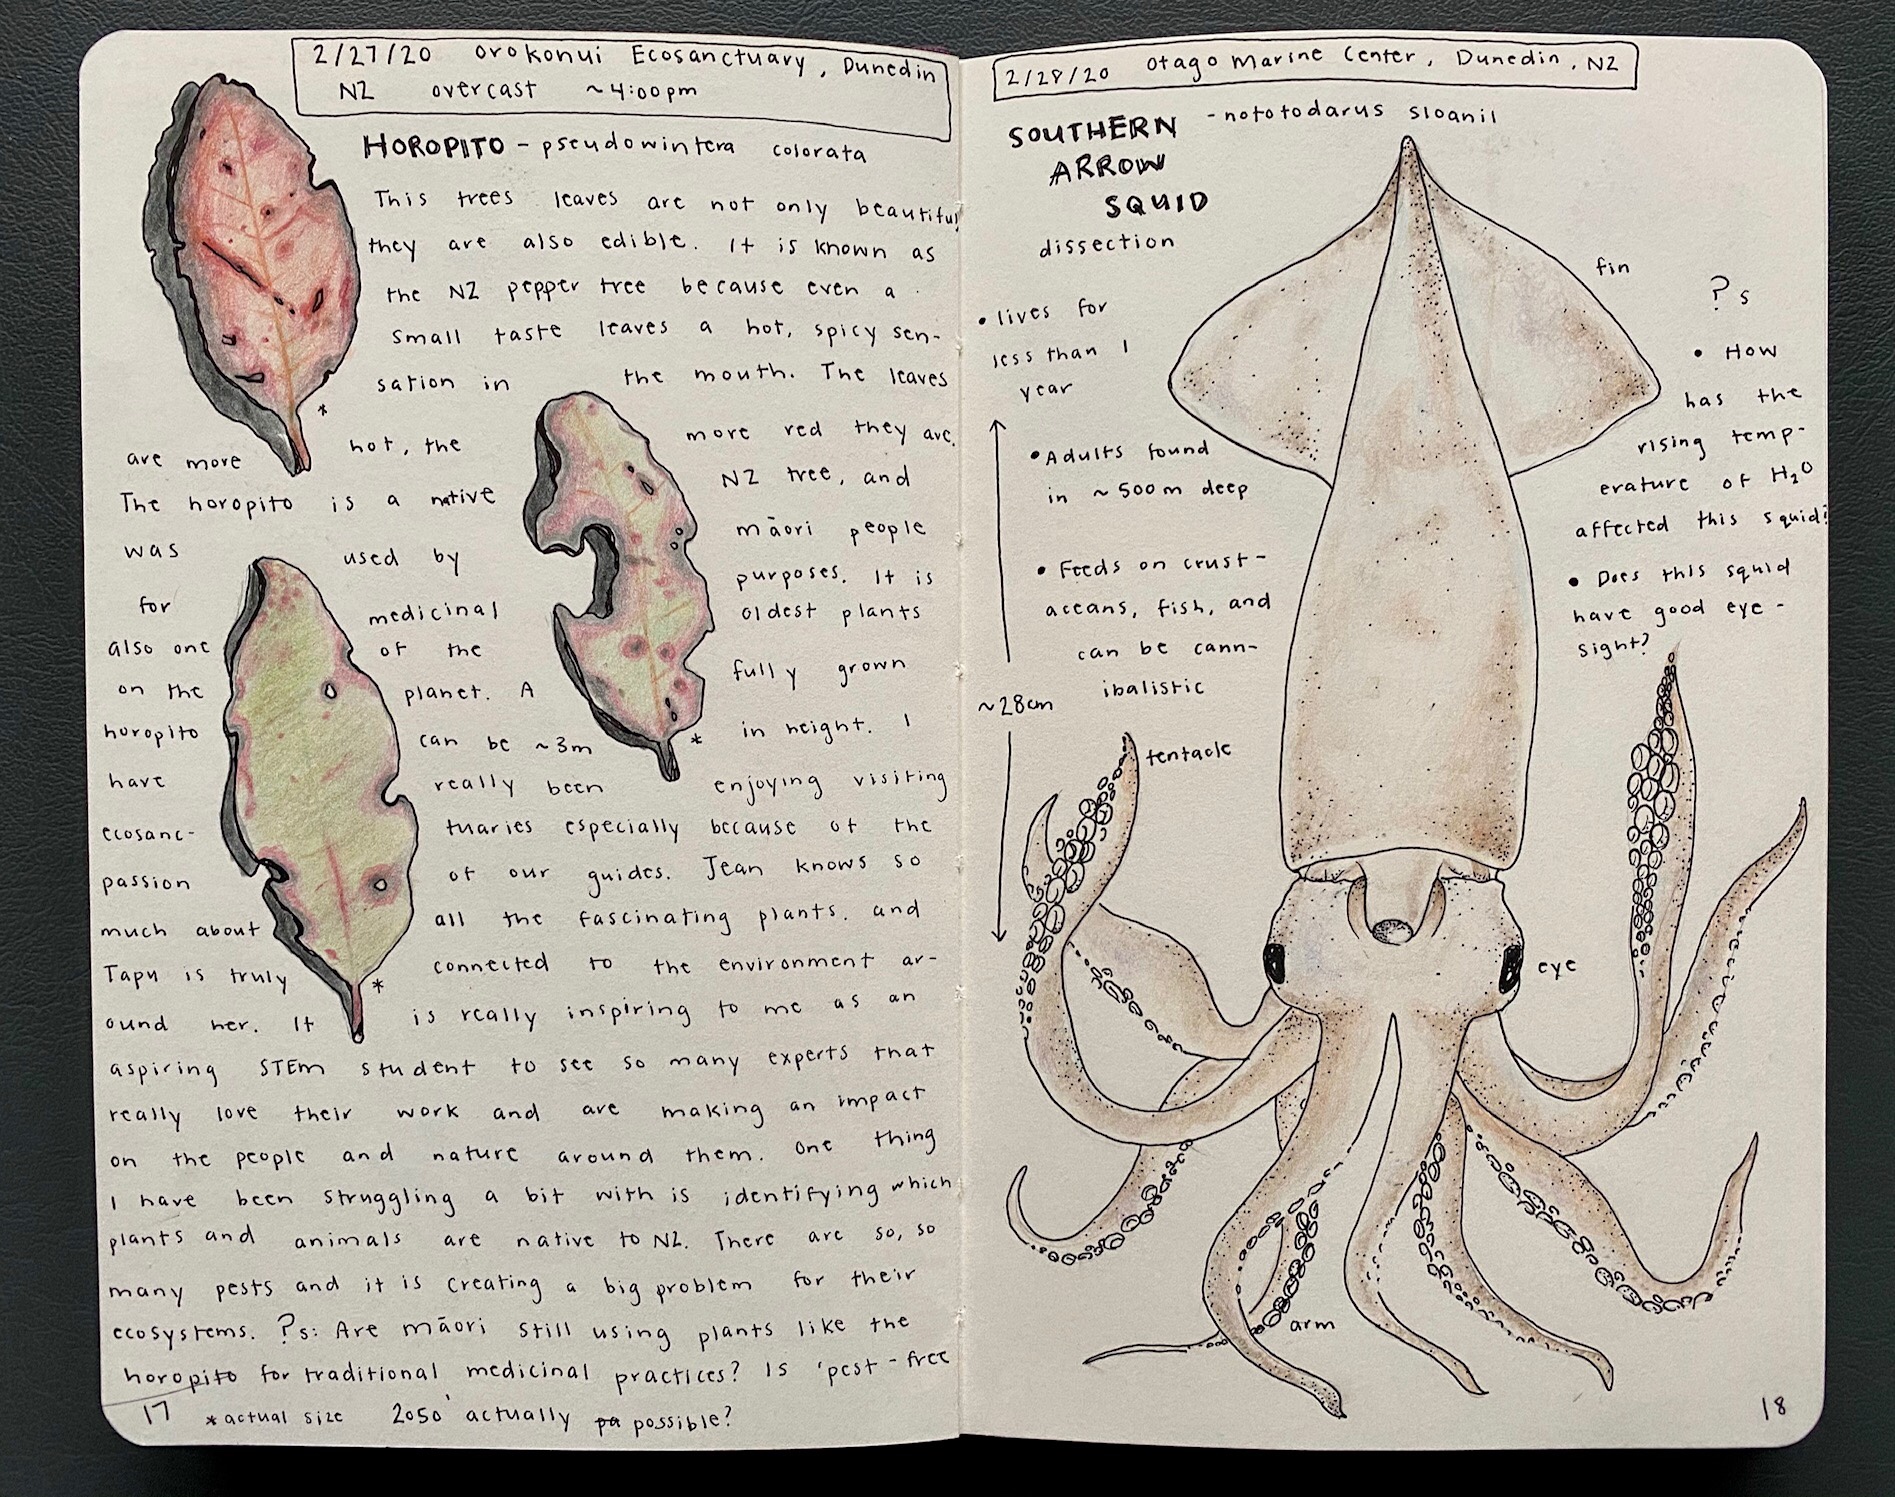 Field drawing of leaves and a Southern Arrow Squid